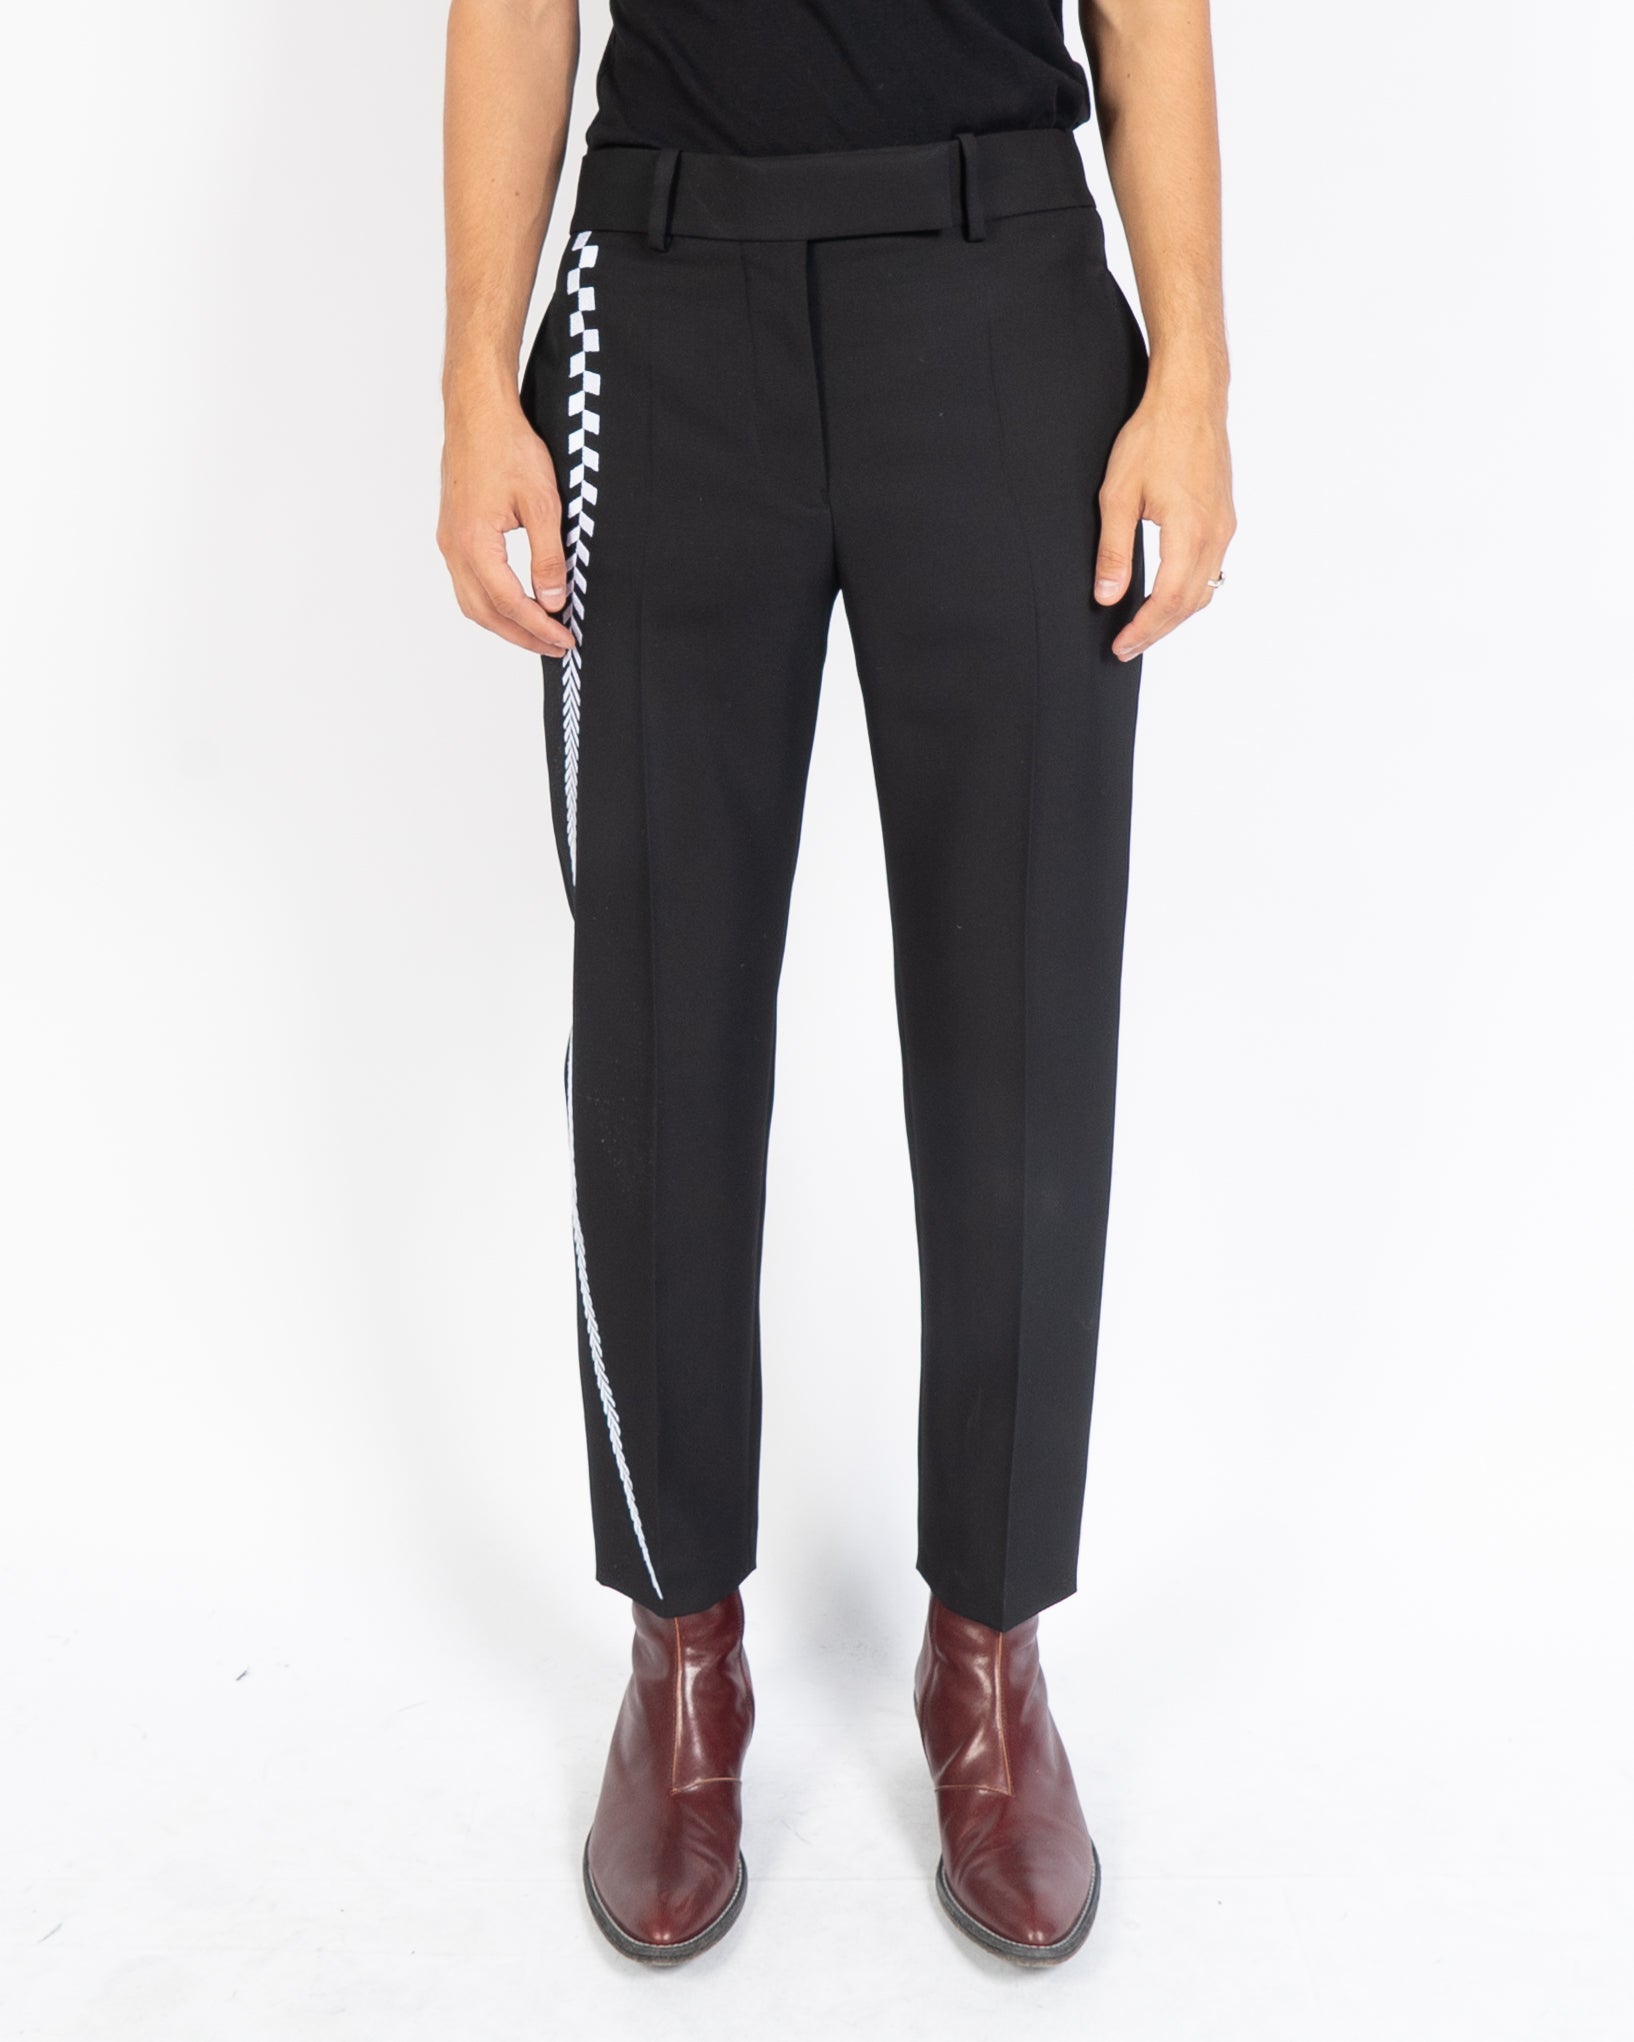 FW19 Embroidered Miles Black Trousers